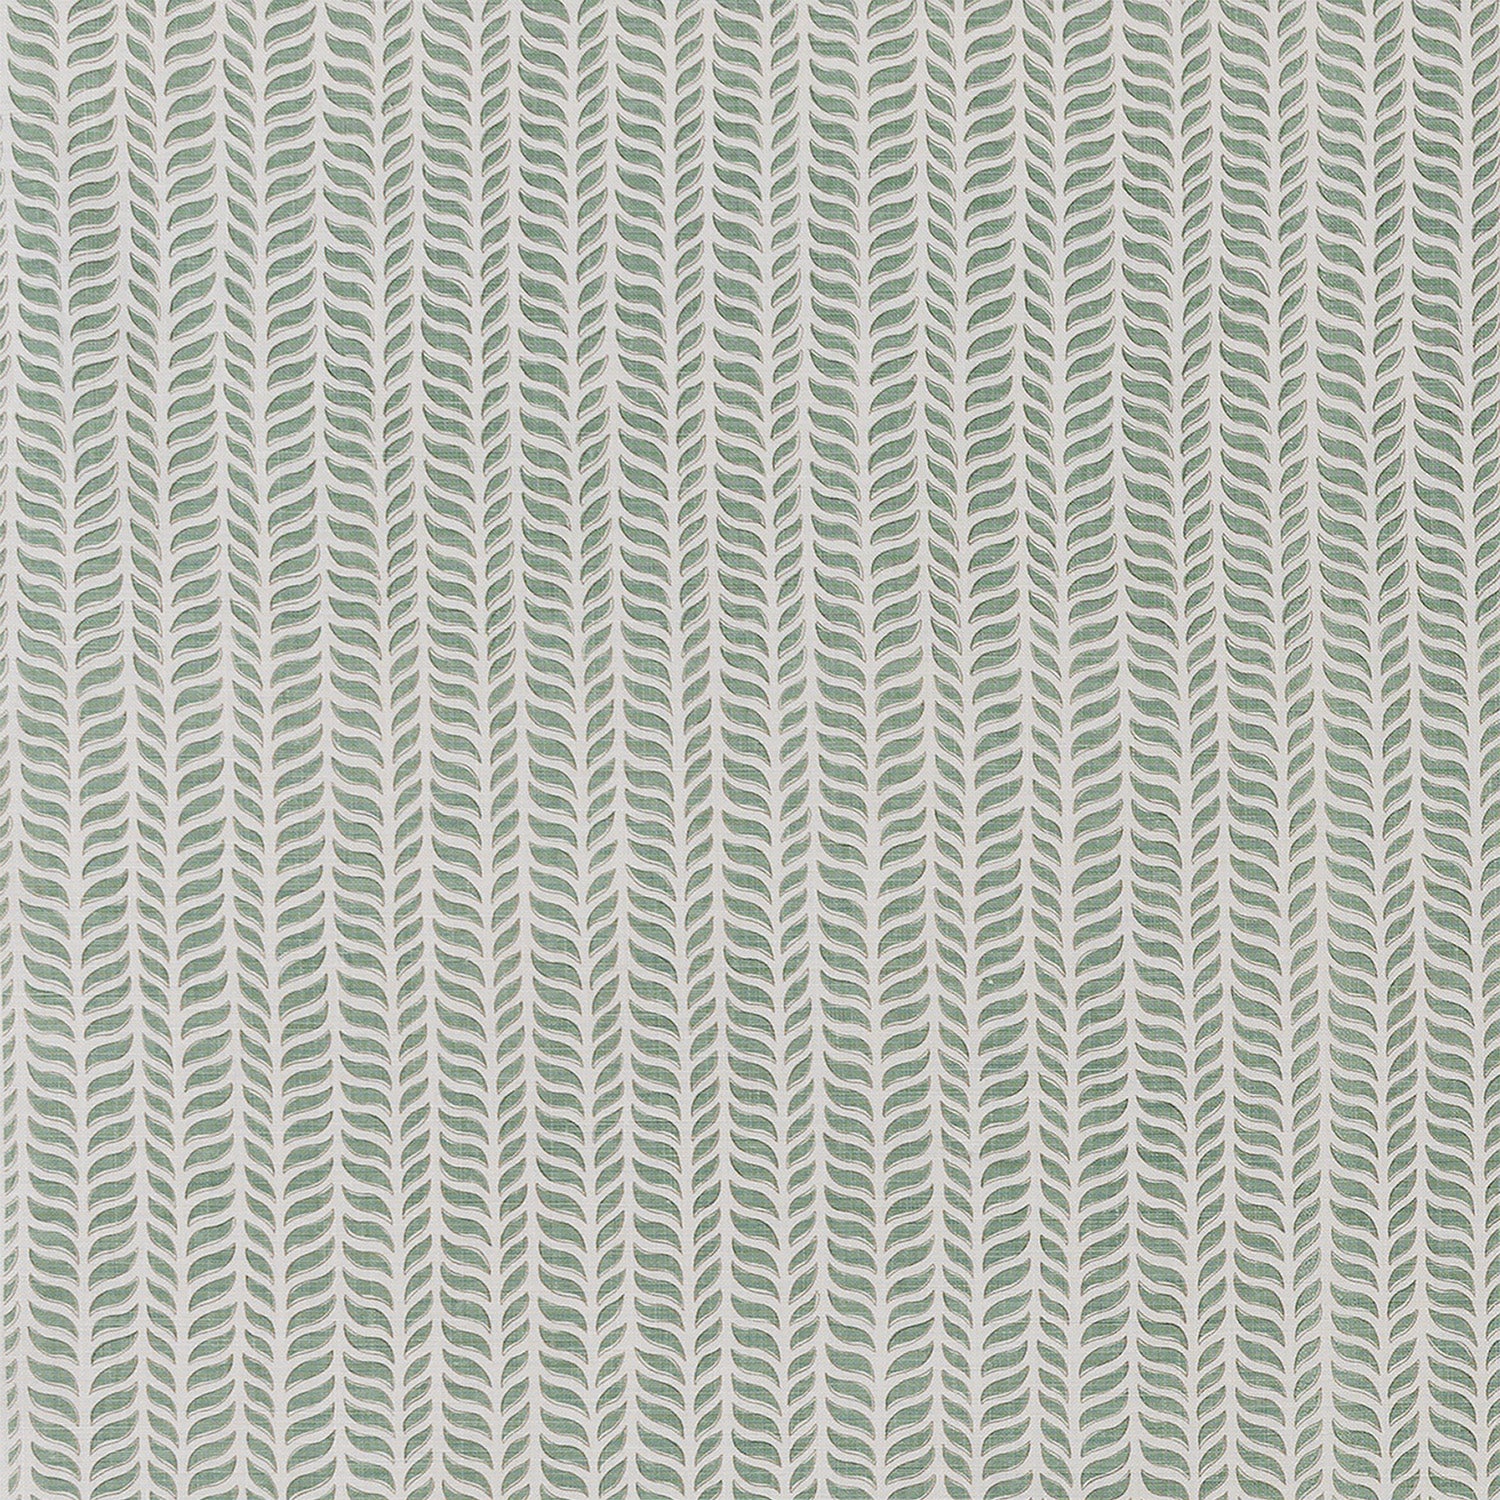 Fabric in a painterly herringbone print in green and brown on a light gray field.